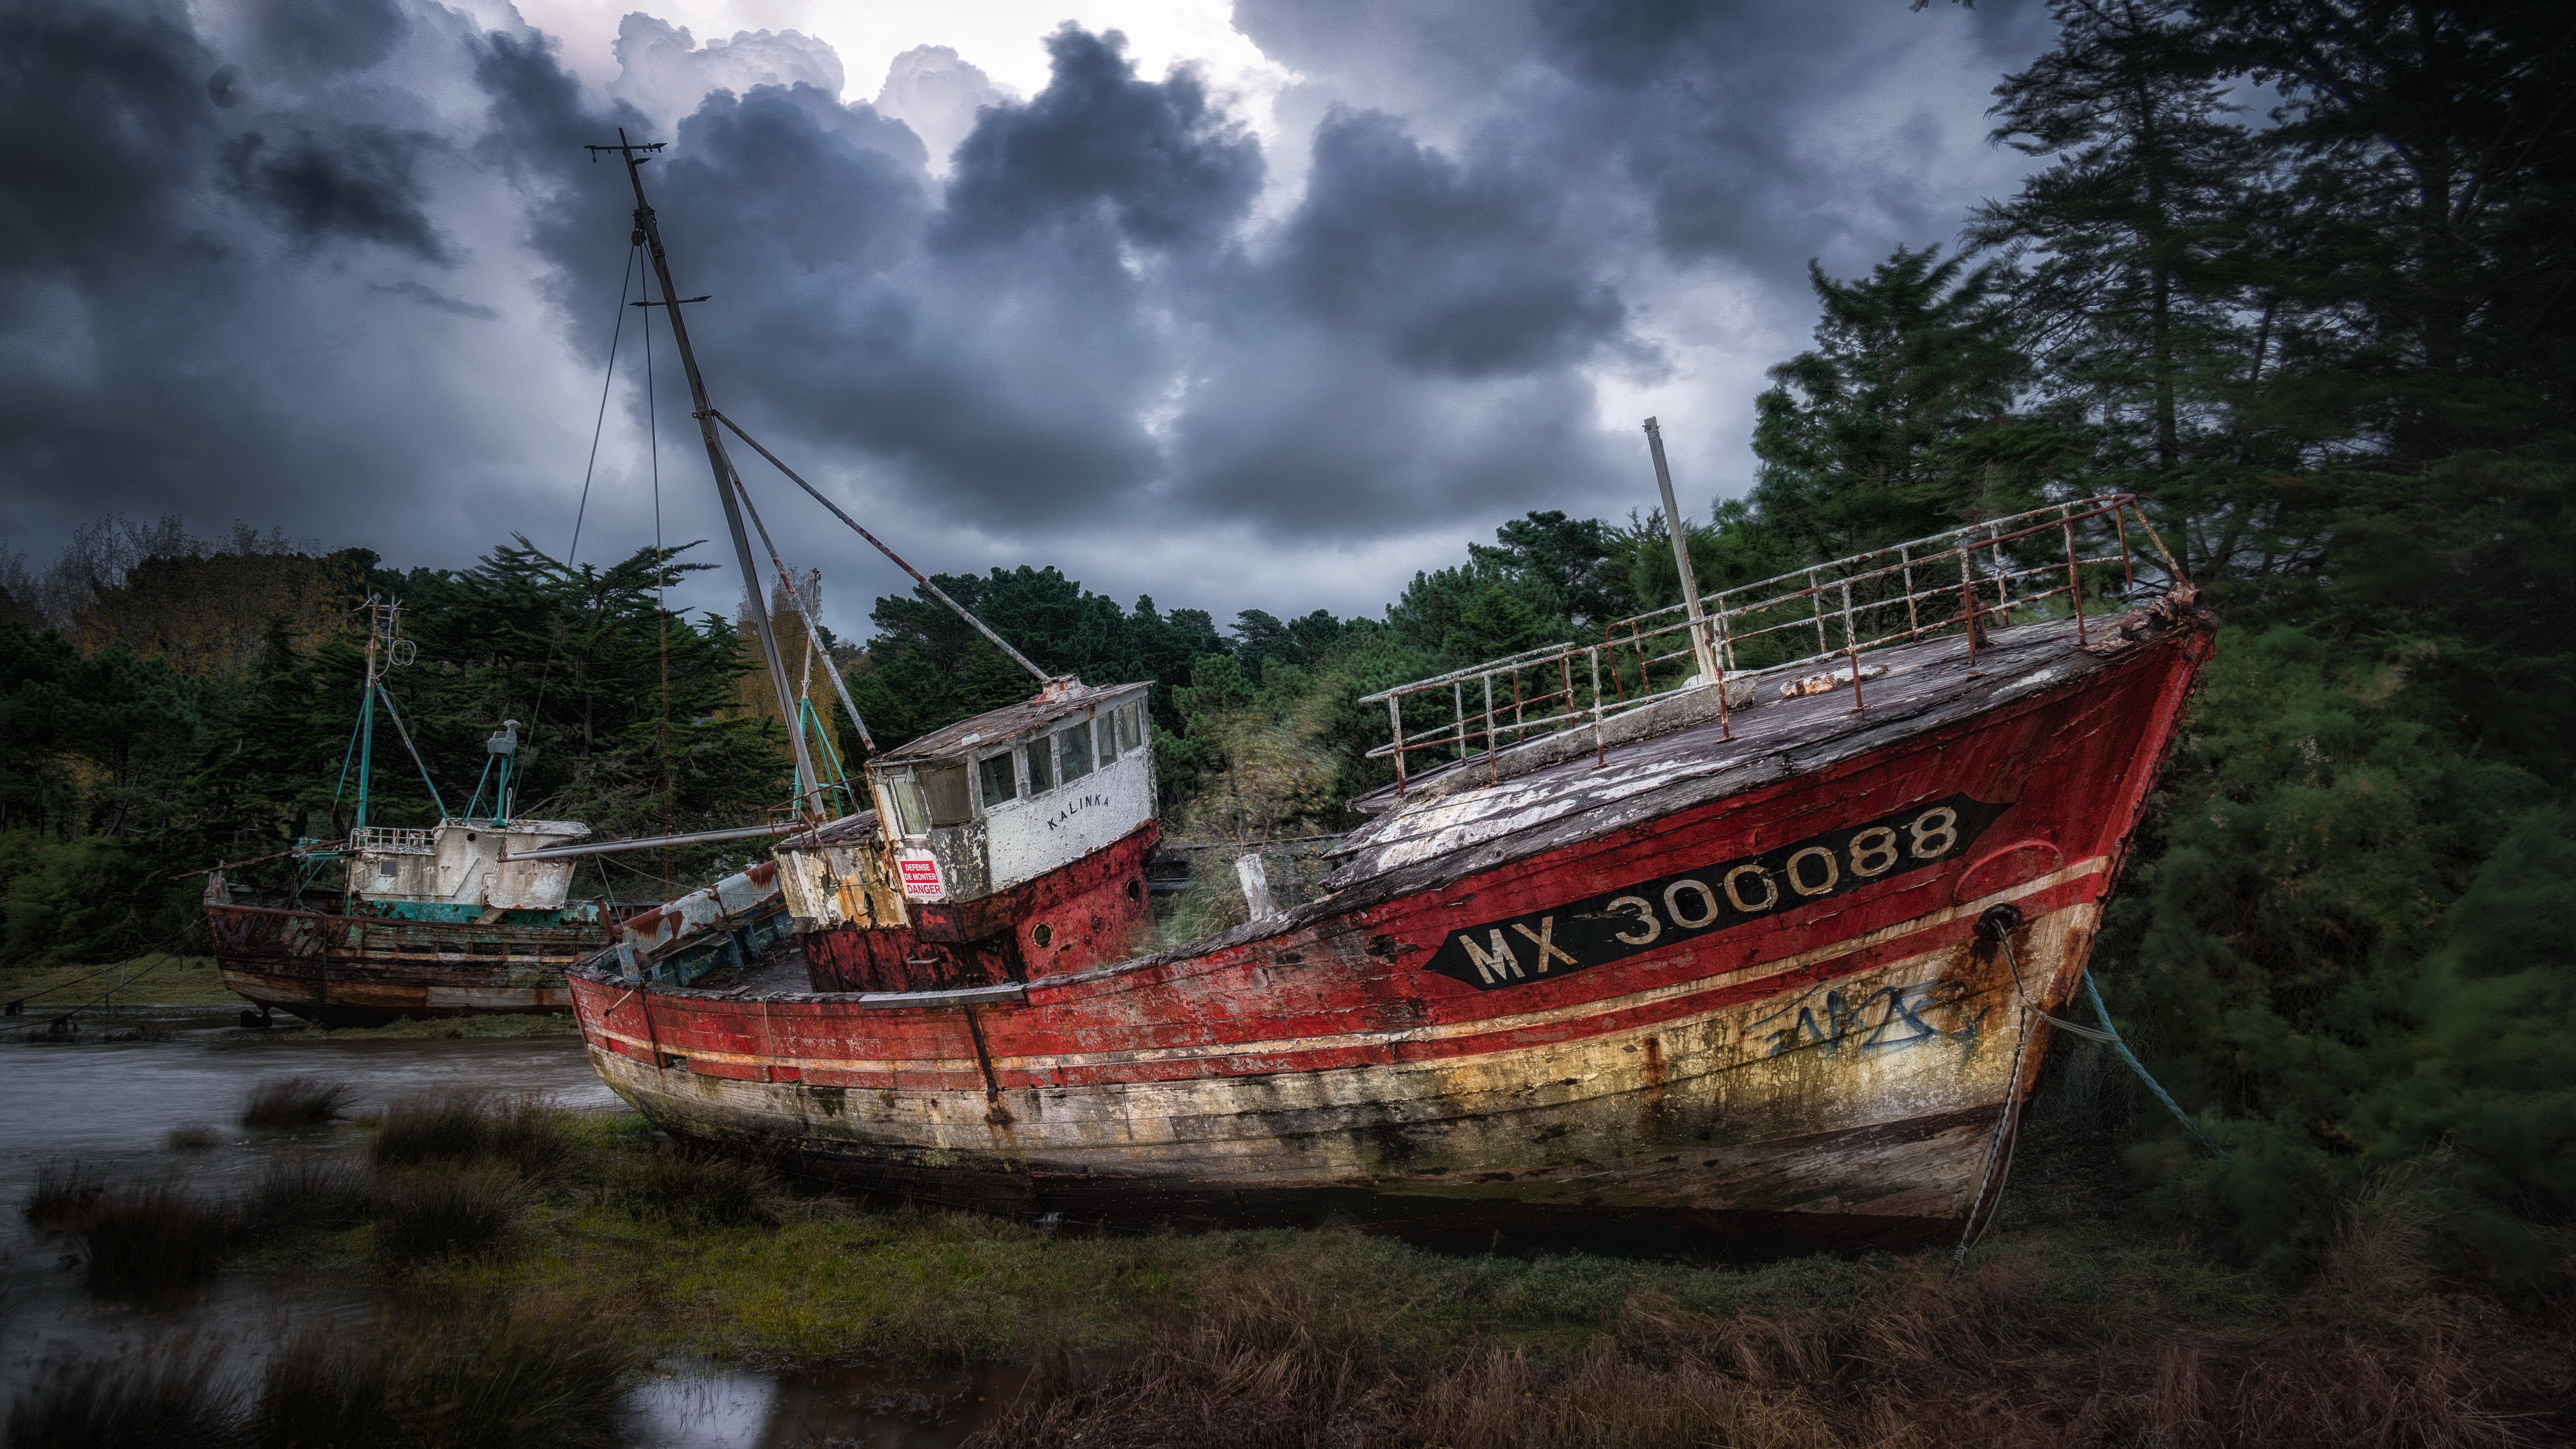 General 3840x2160 outdoors boat wreck numbers fishing boat ship